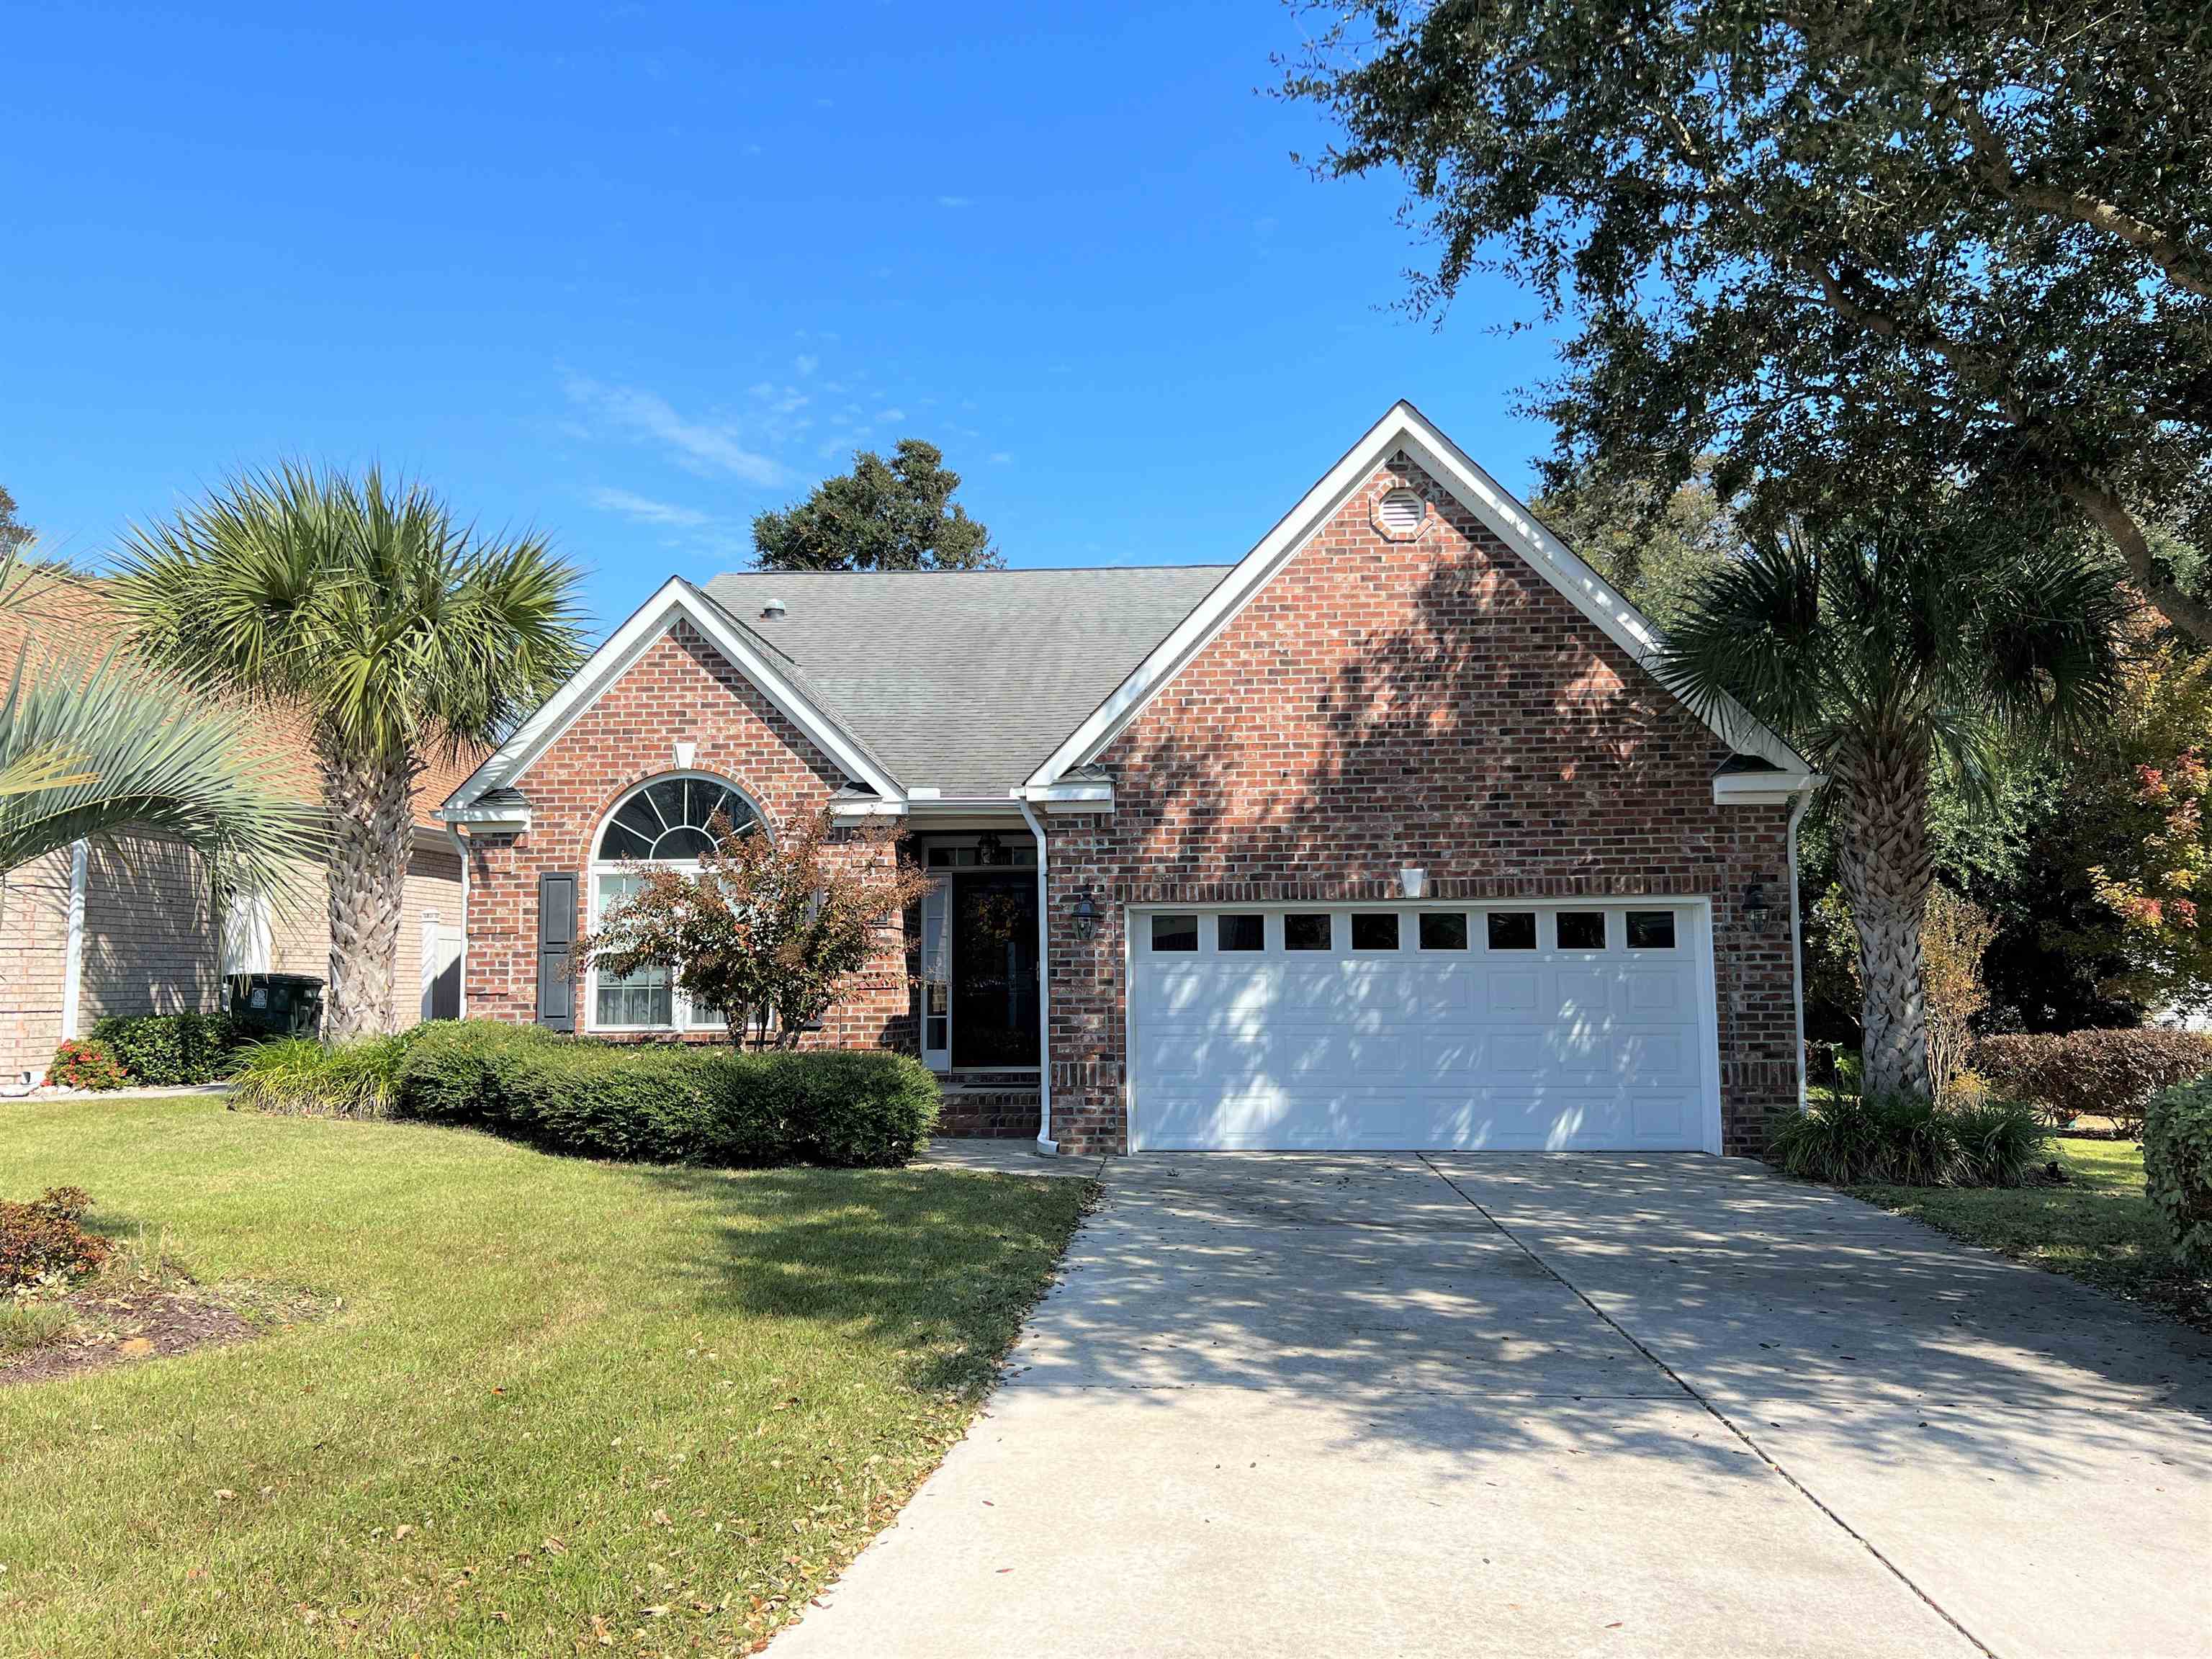 502 5th Ave. S North Myrtle Beach, SC 29582